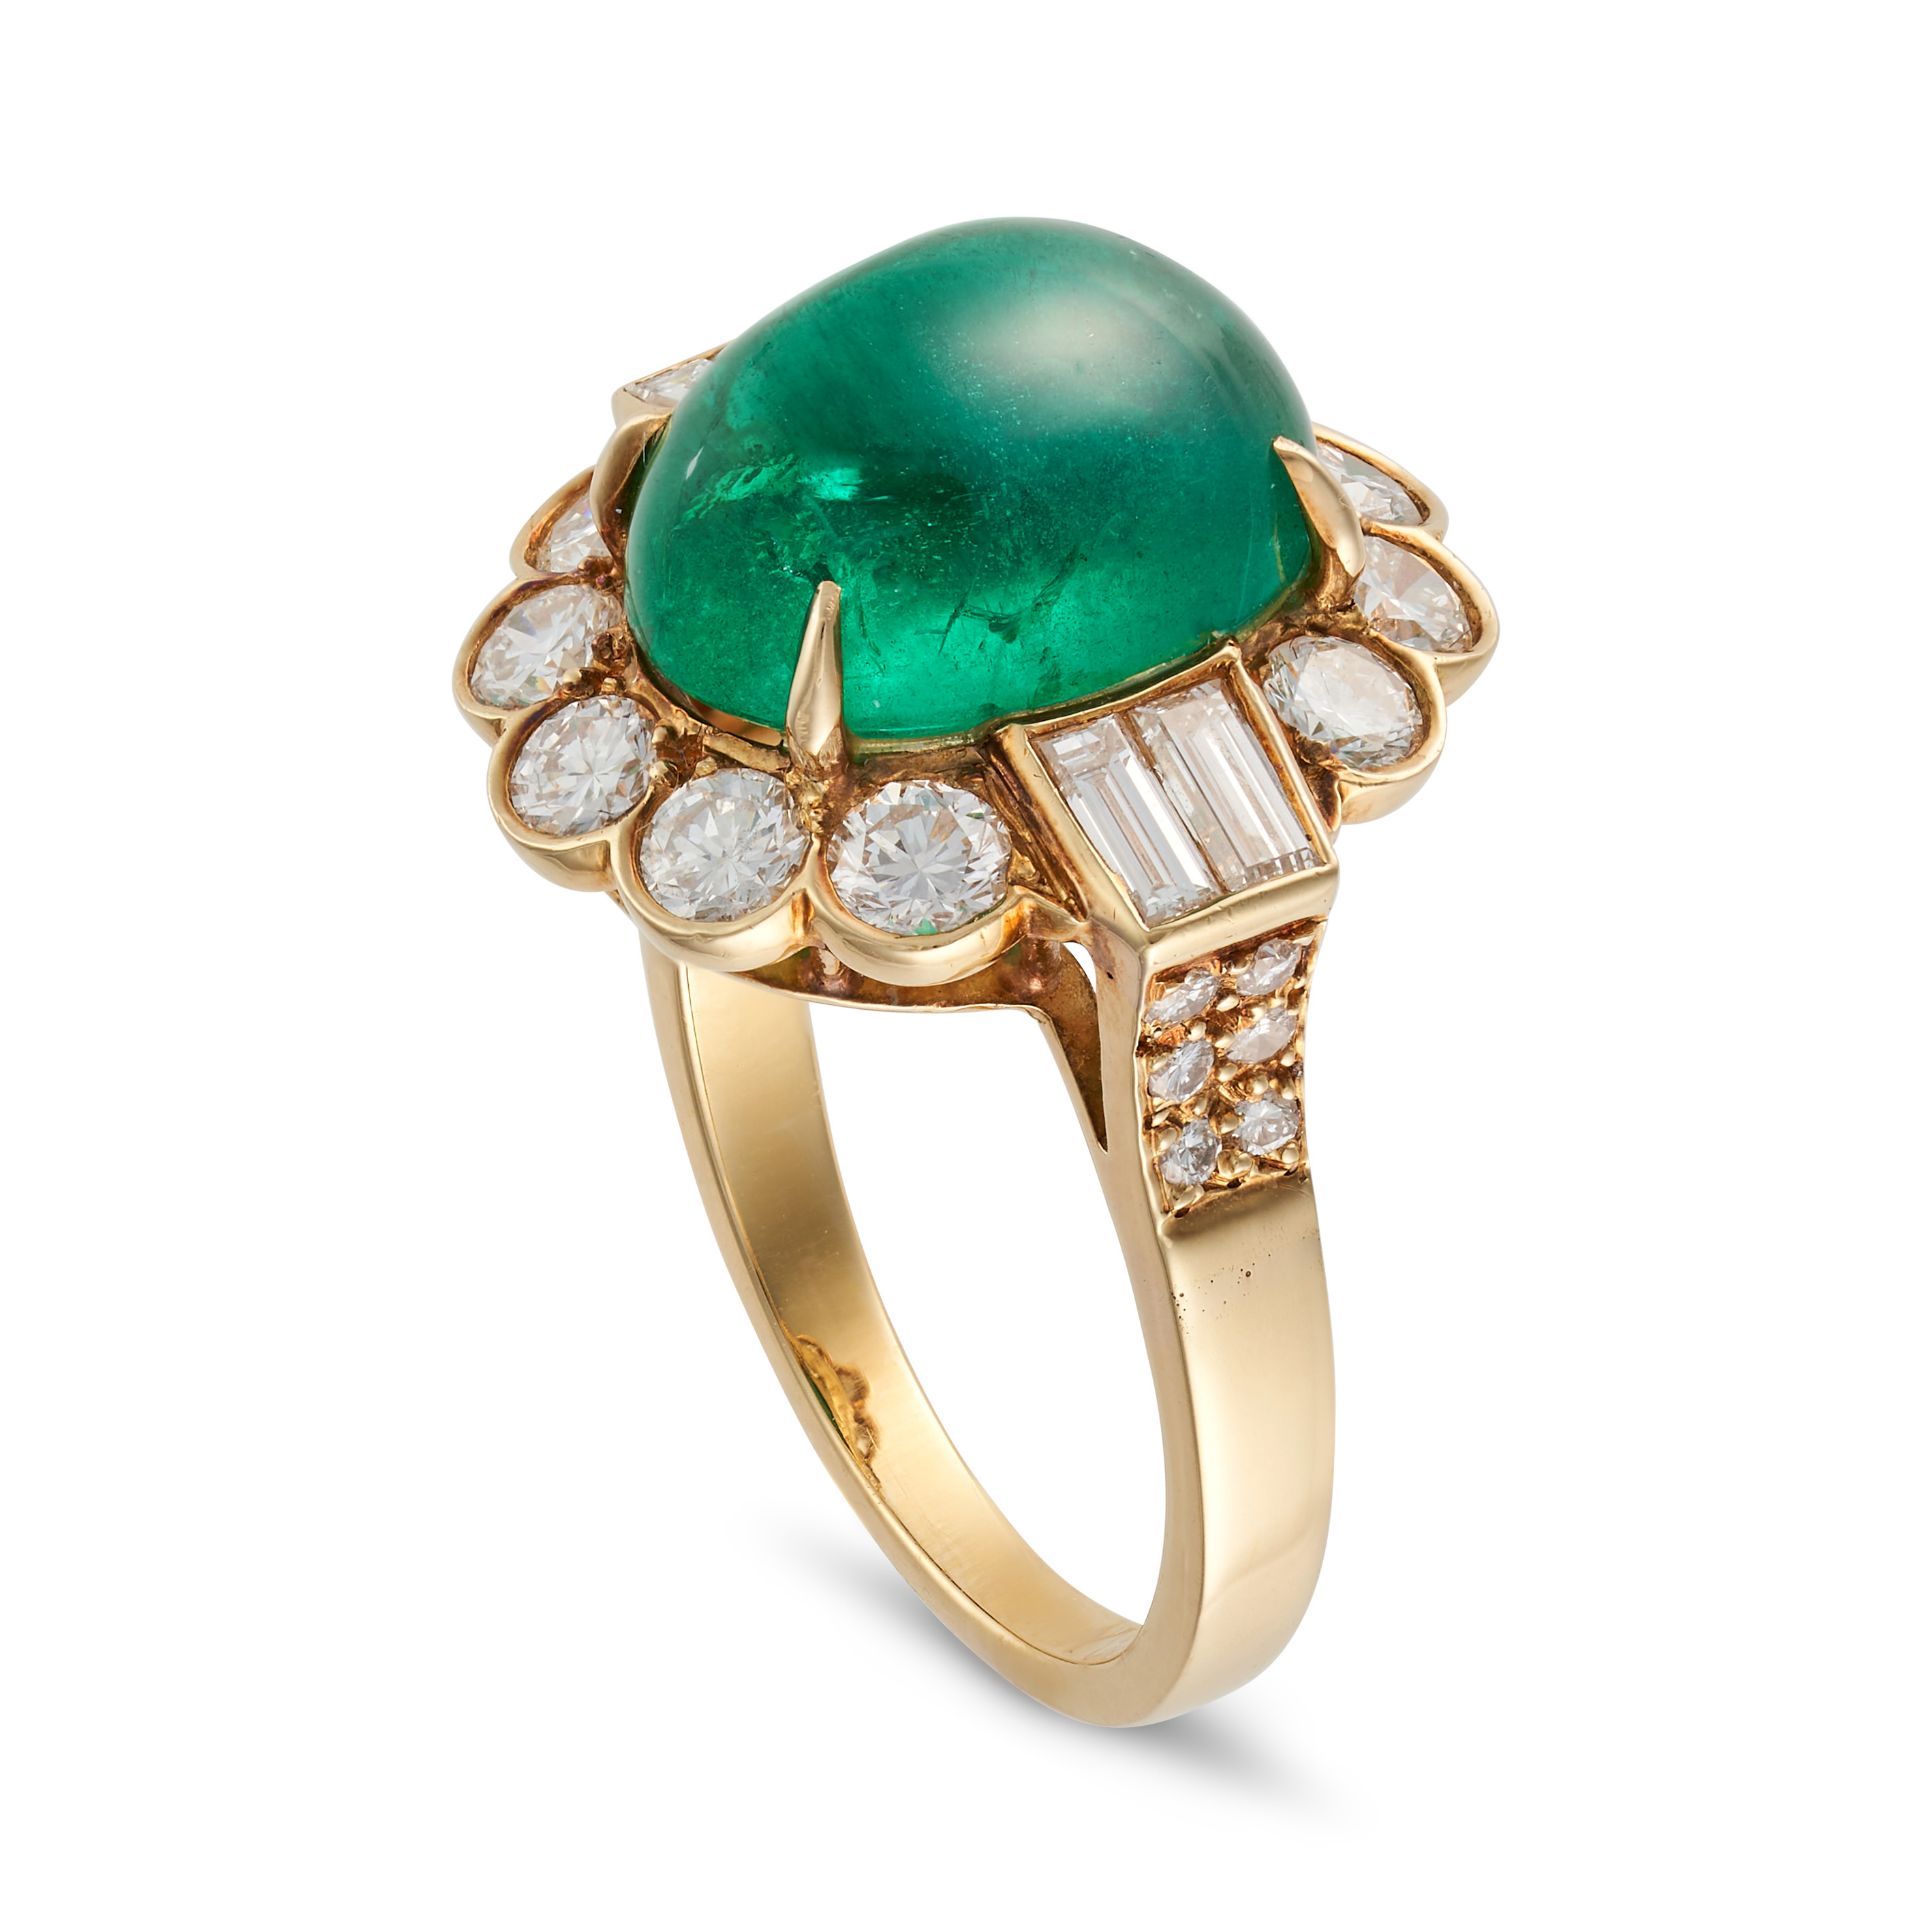 VAN CLEEF & ARPELS, AN EMERALD AND DIAMOND RING in 18ct yellow gold, set with an oval cabochon em... - Bild 2 aus 2